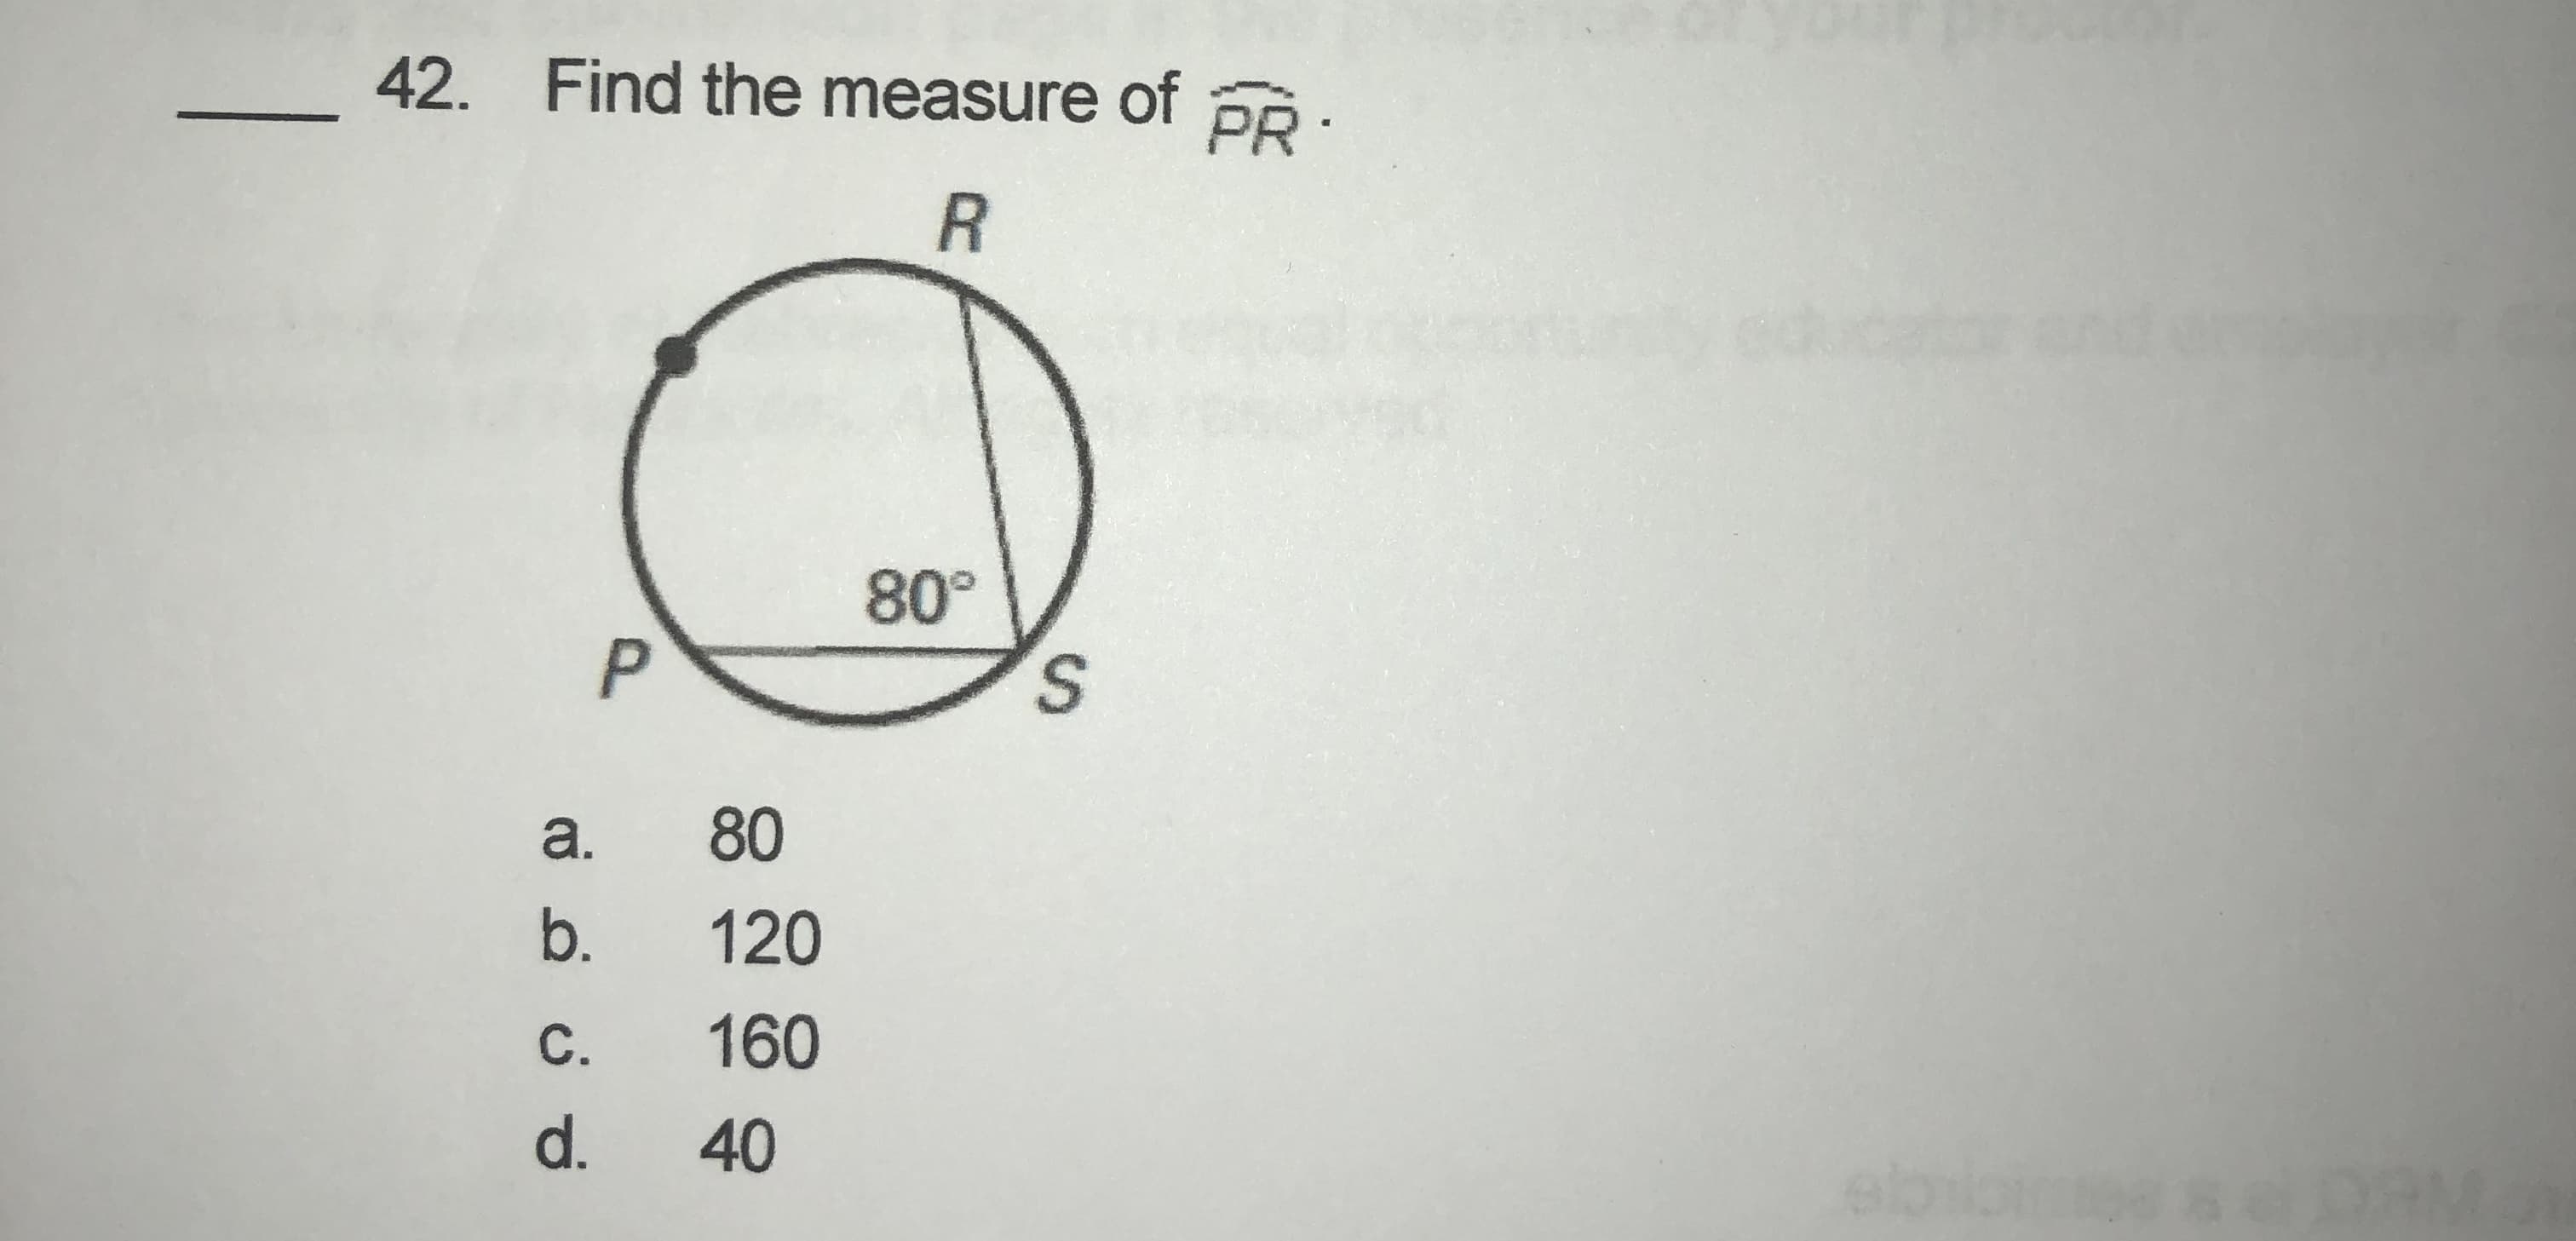 42. Find the measure of pR:
R
80°
S.
a.
80
b.
120
C.
160
d.
40
